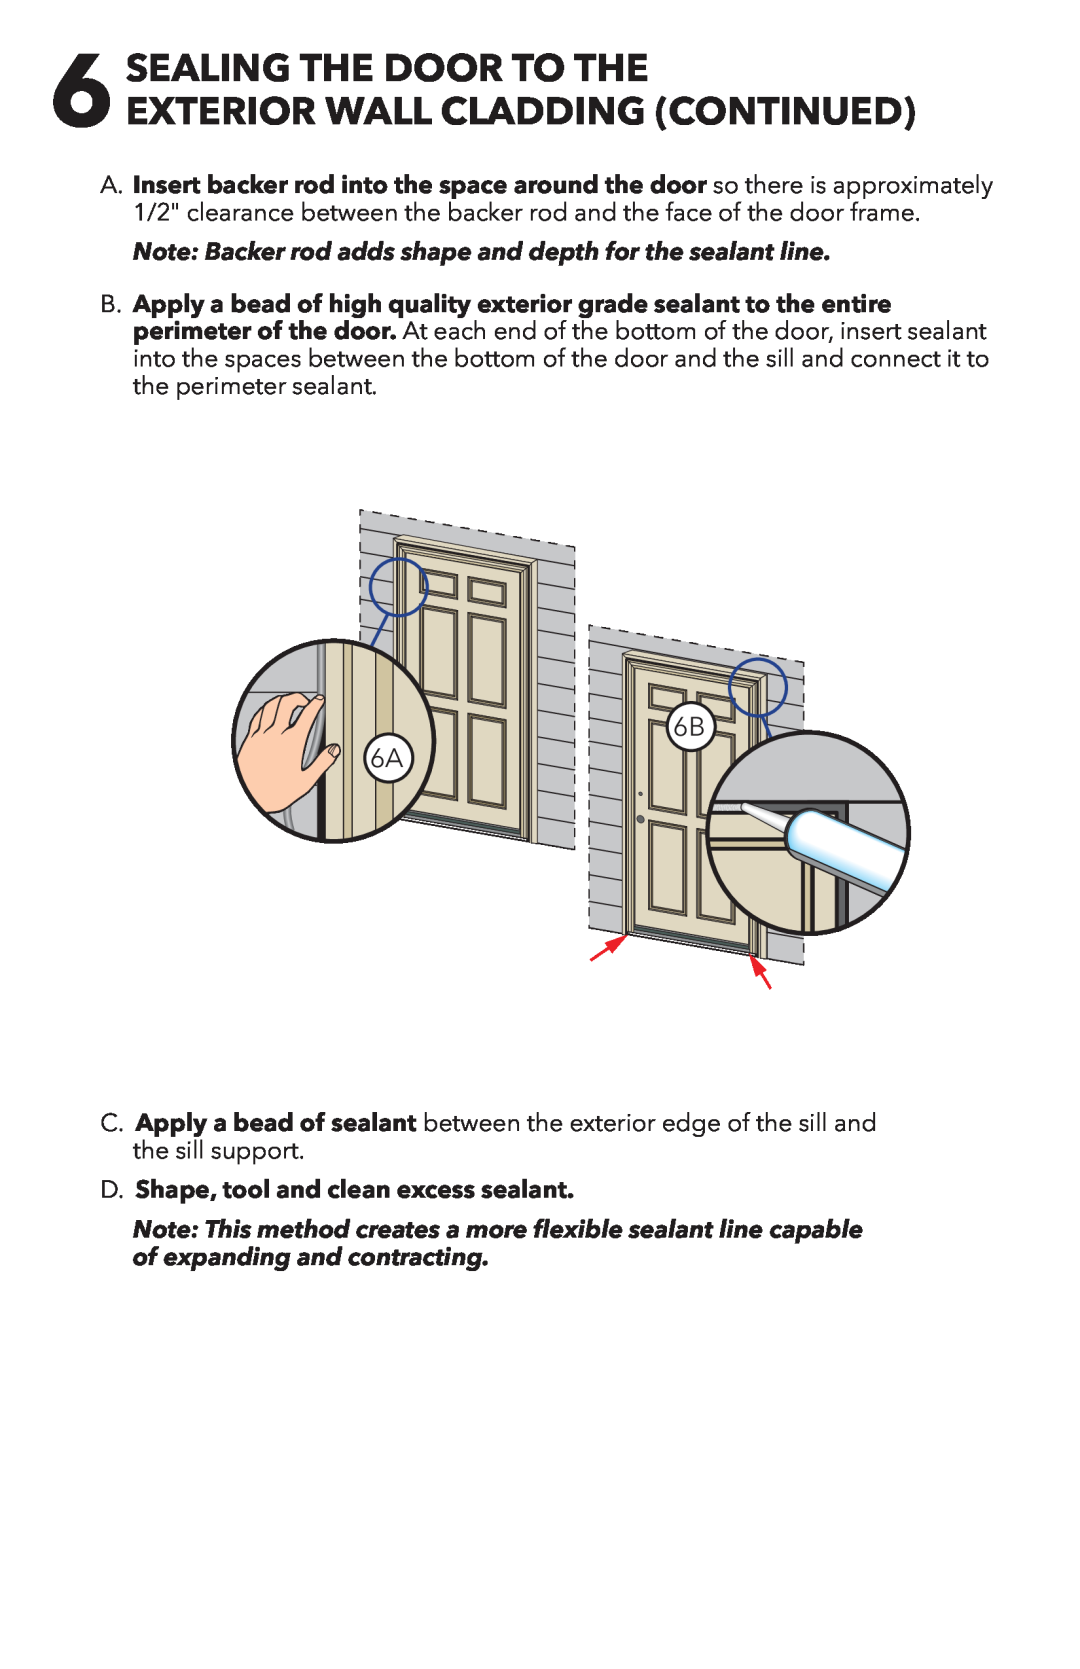 Pella 818T0101 installation instructions 6SEALING THE DOOR TO THE, Exterior Wall Cladding Continued, 6A5A 